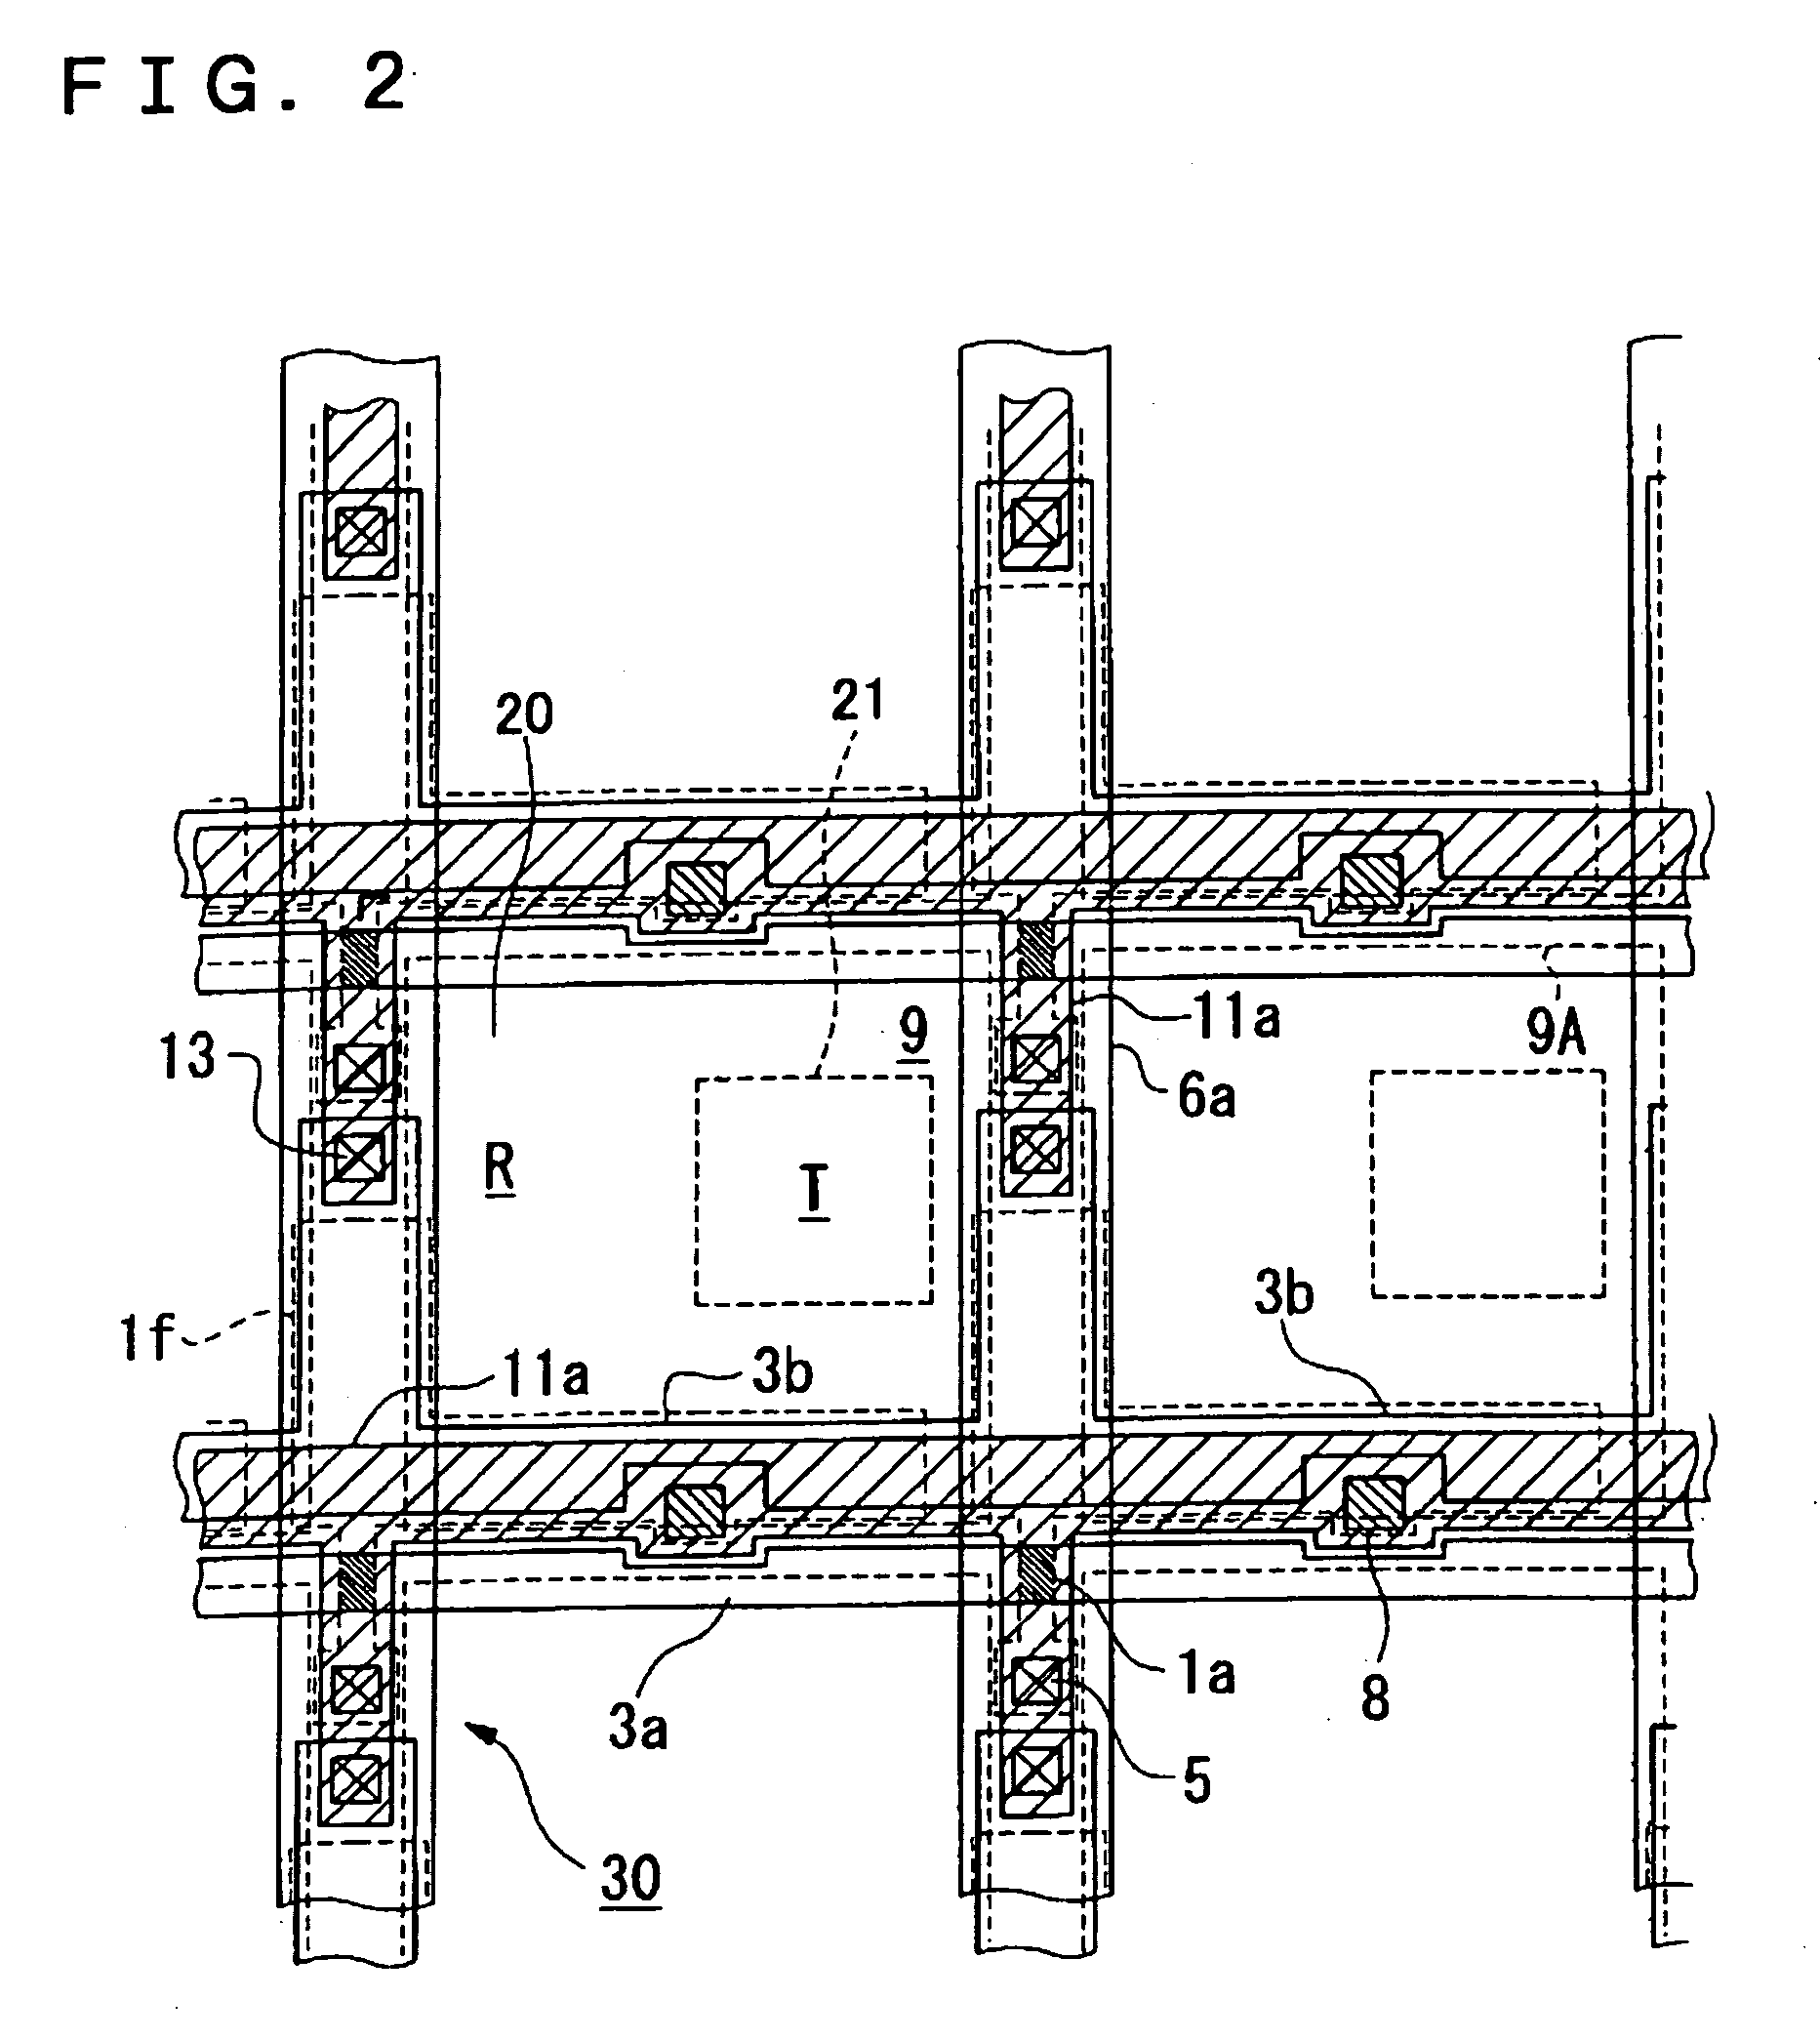 Liquid crystal display device having particular alignment controlling elements in transmissive and reflective pixel regions